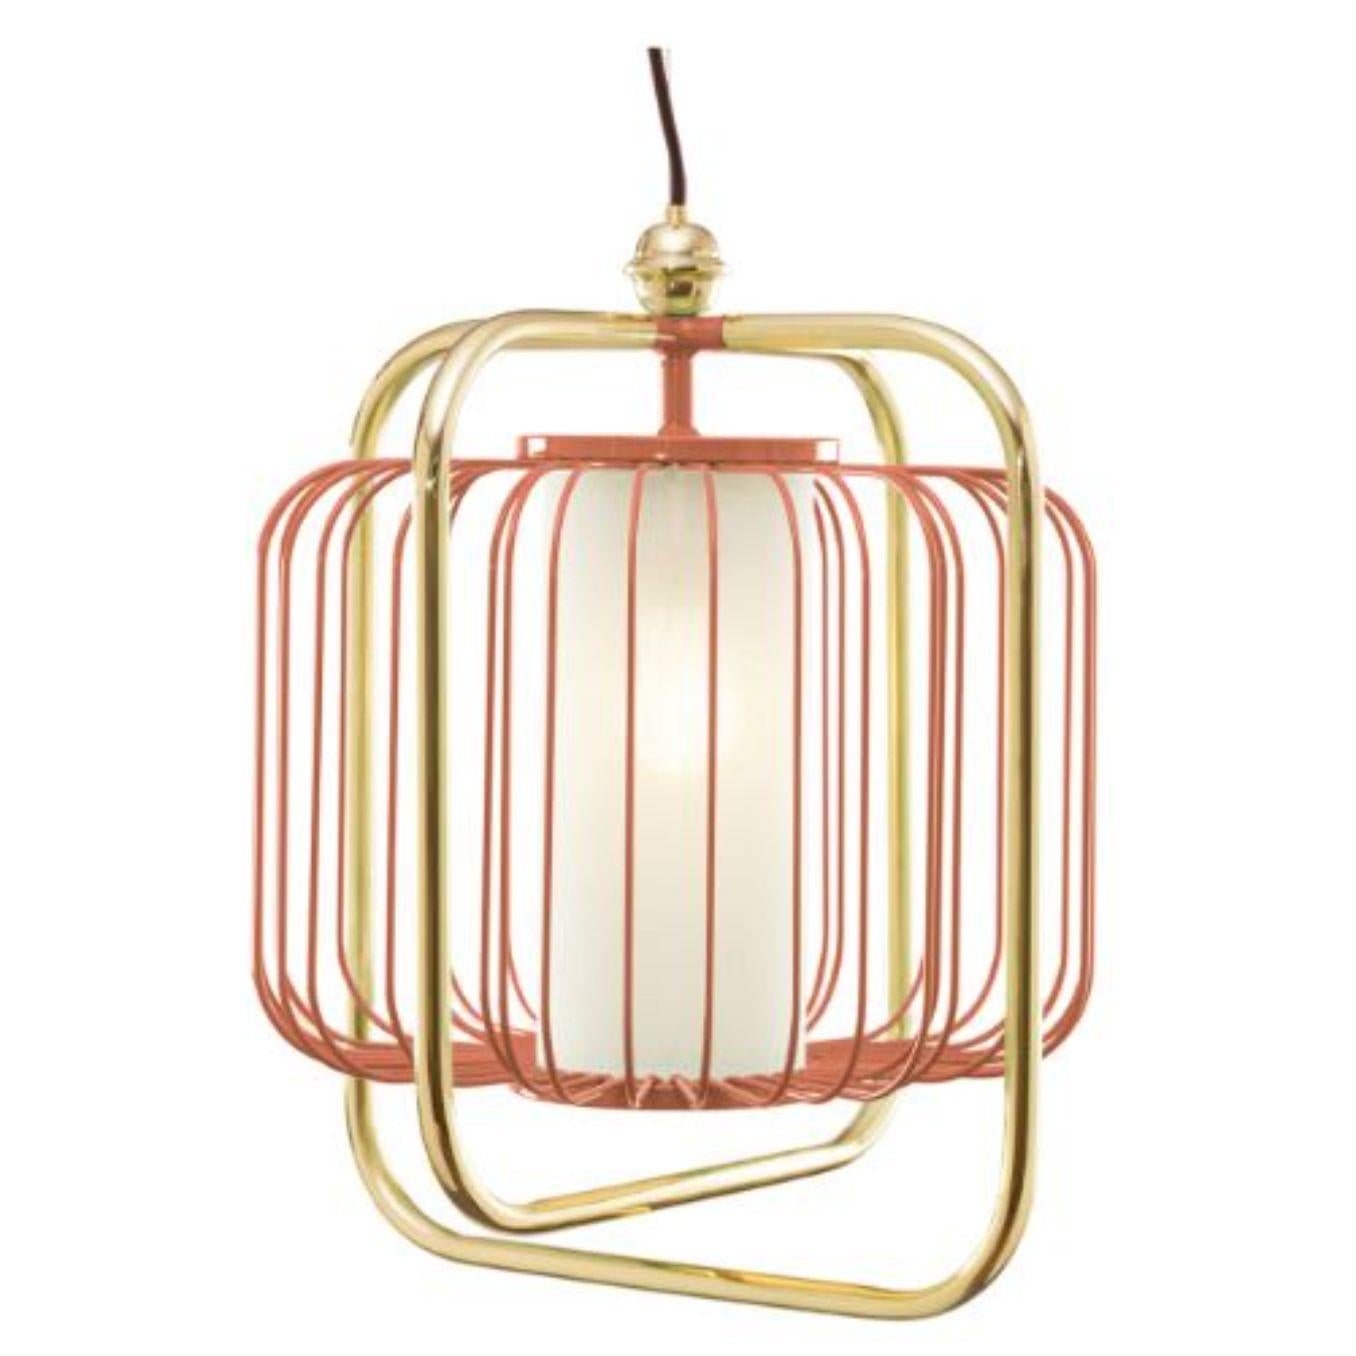 Brass and Lipstick Jules III Suspension Lamp by Dooq For Sale 3